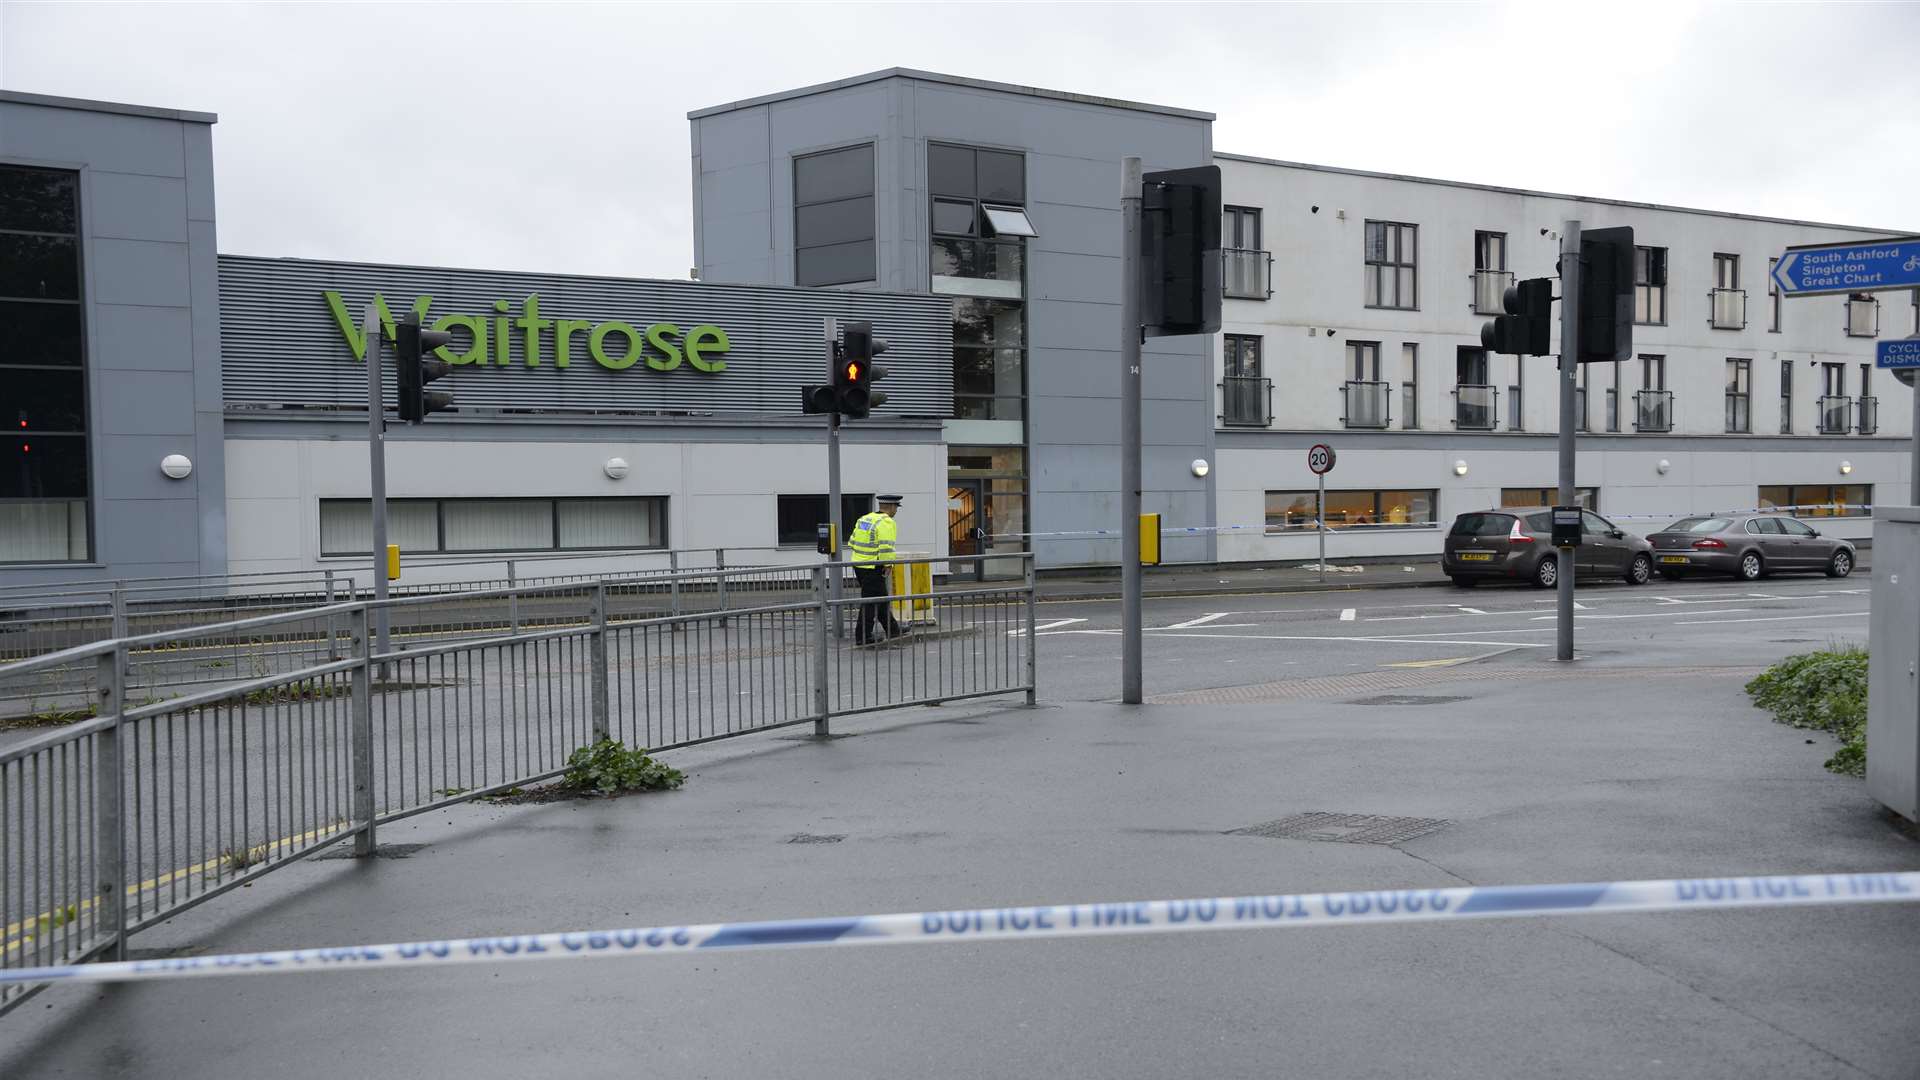 The area was cordoned off in the aftermath. Picture: Paul Amos.